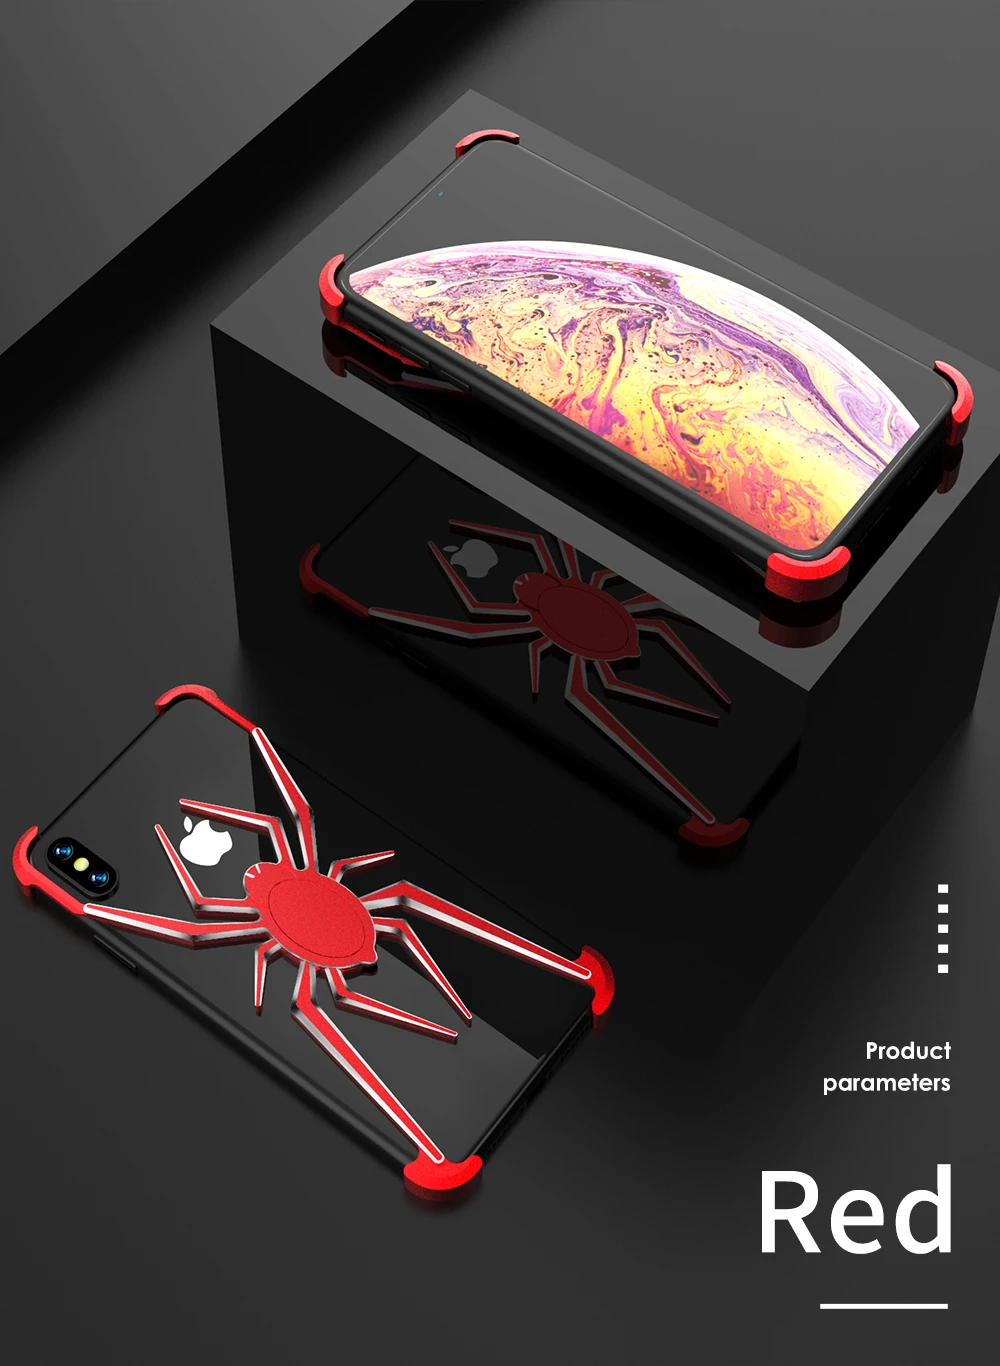 Spider serial Shockproof Armor Phone Back Case For i X XR XS MAX Silicone Hybrid Hard PC Three Proofing Case Cover